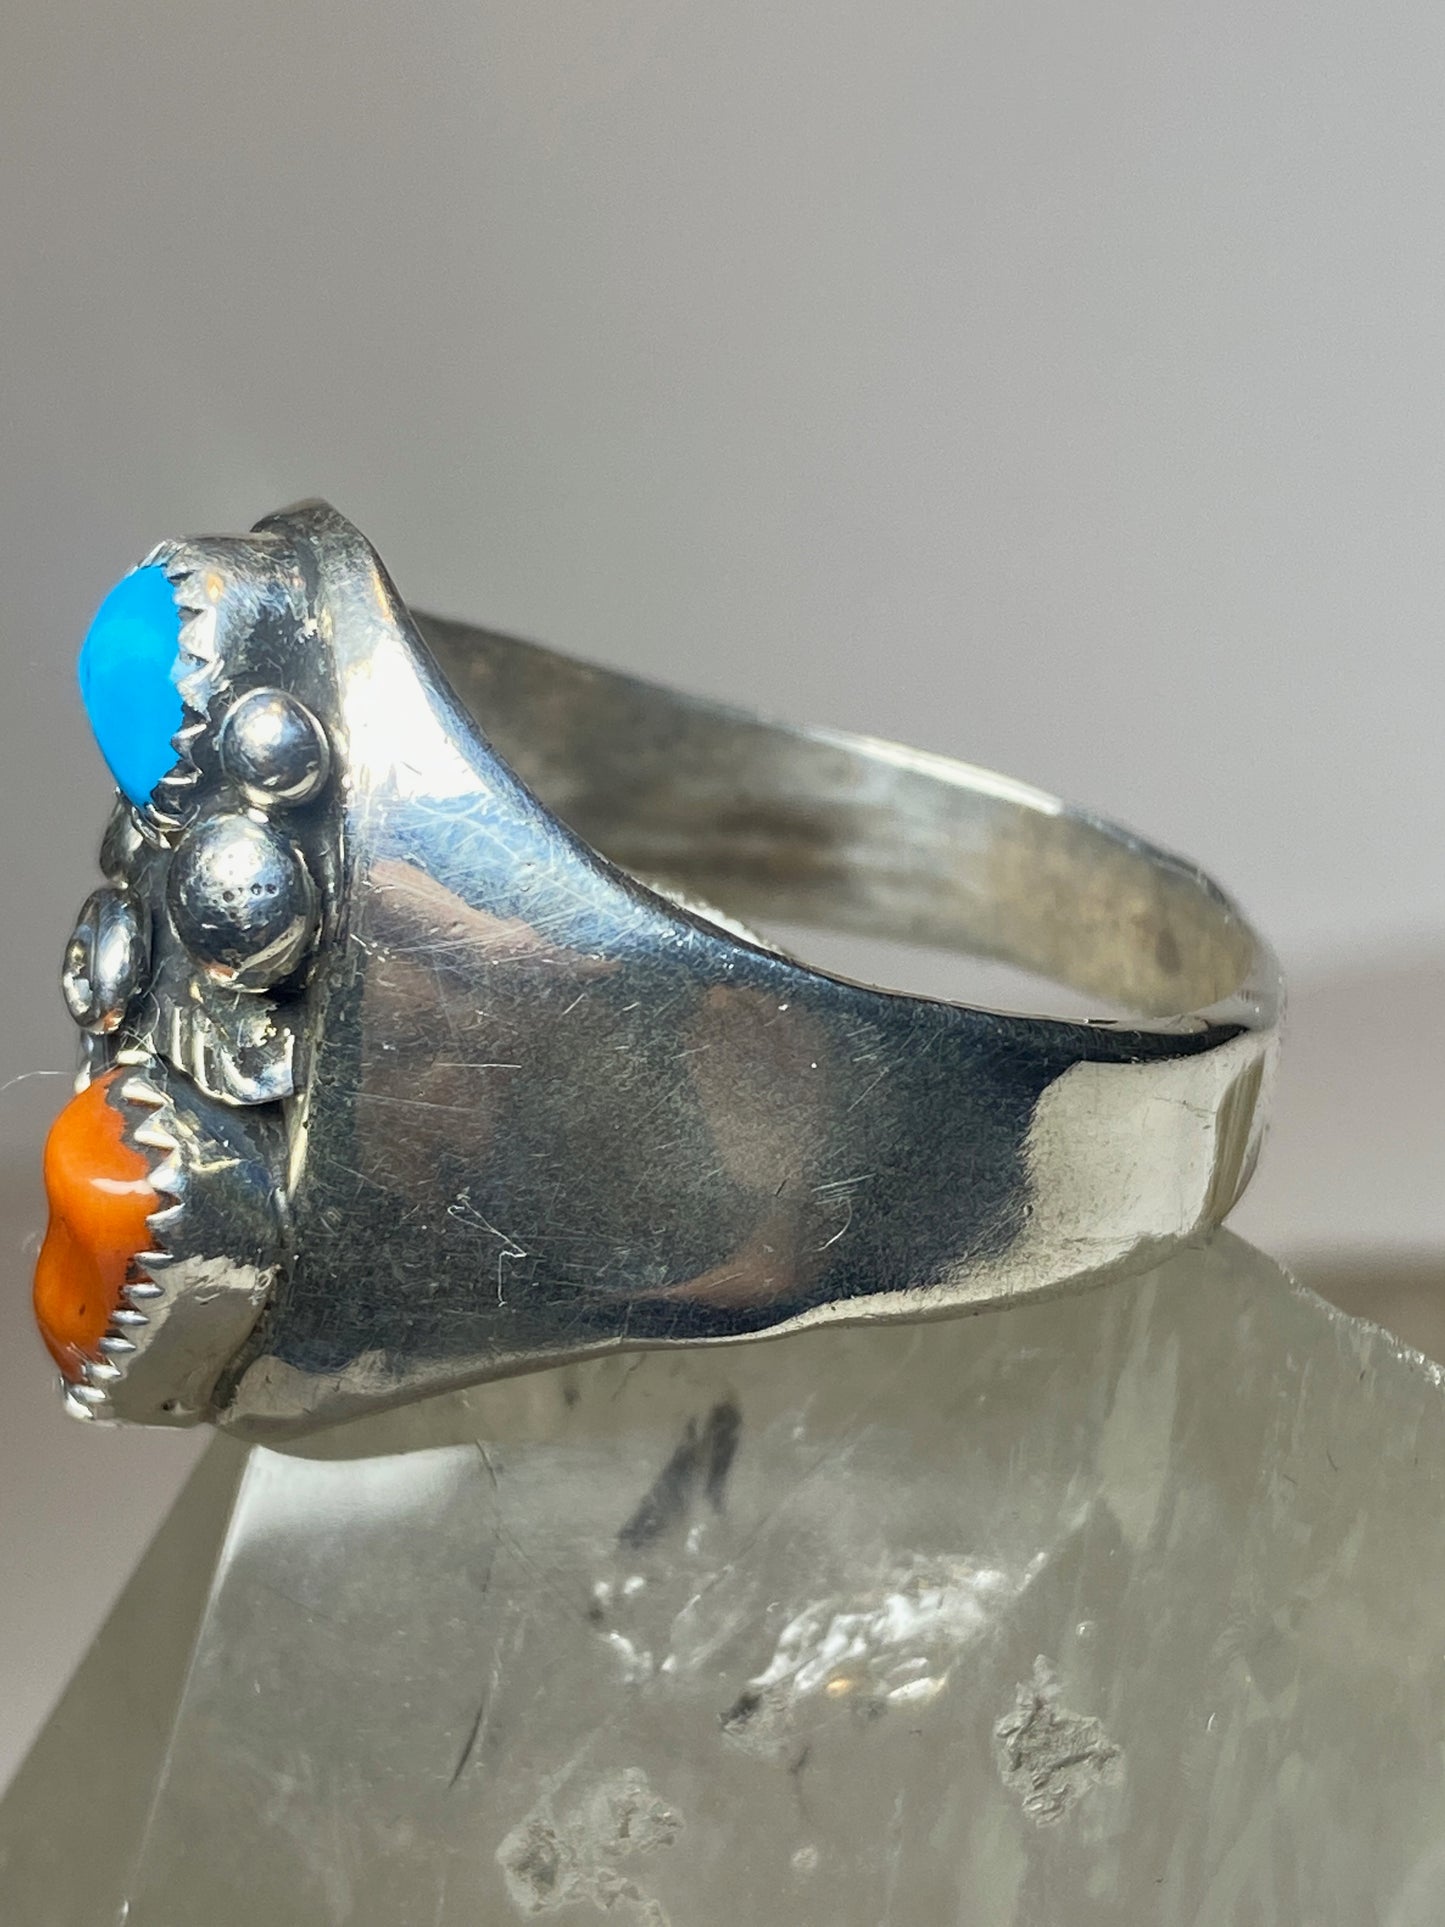 Navajo ring turquoise coral  southwest  sterling silver women men